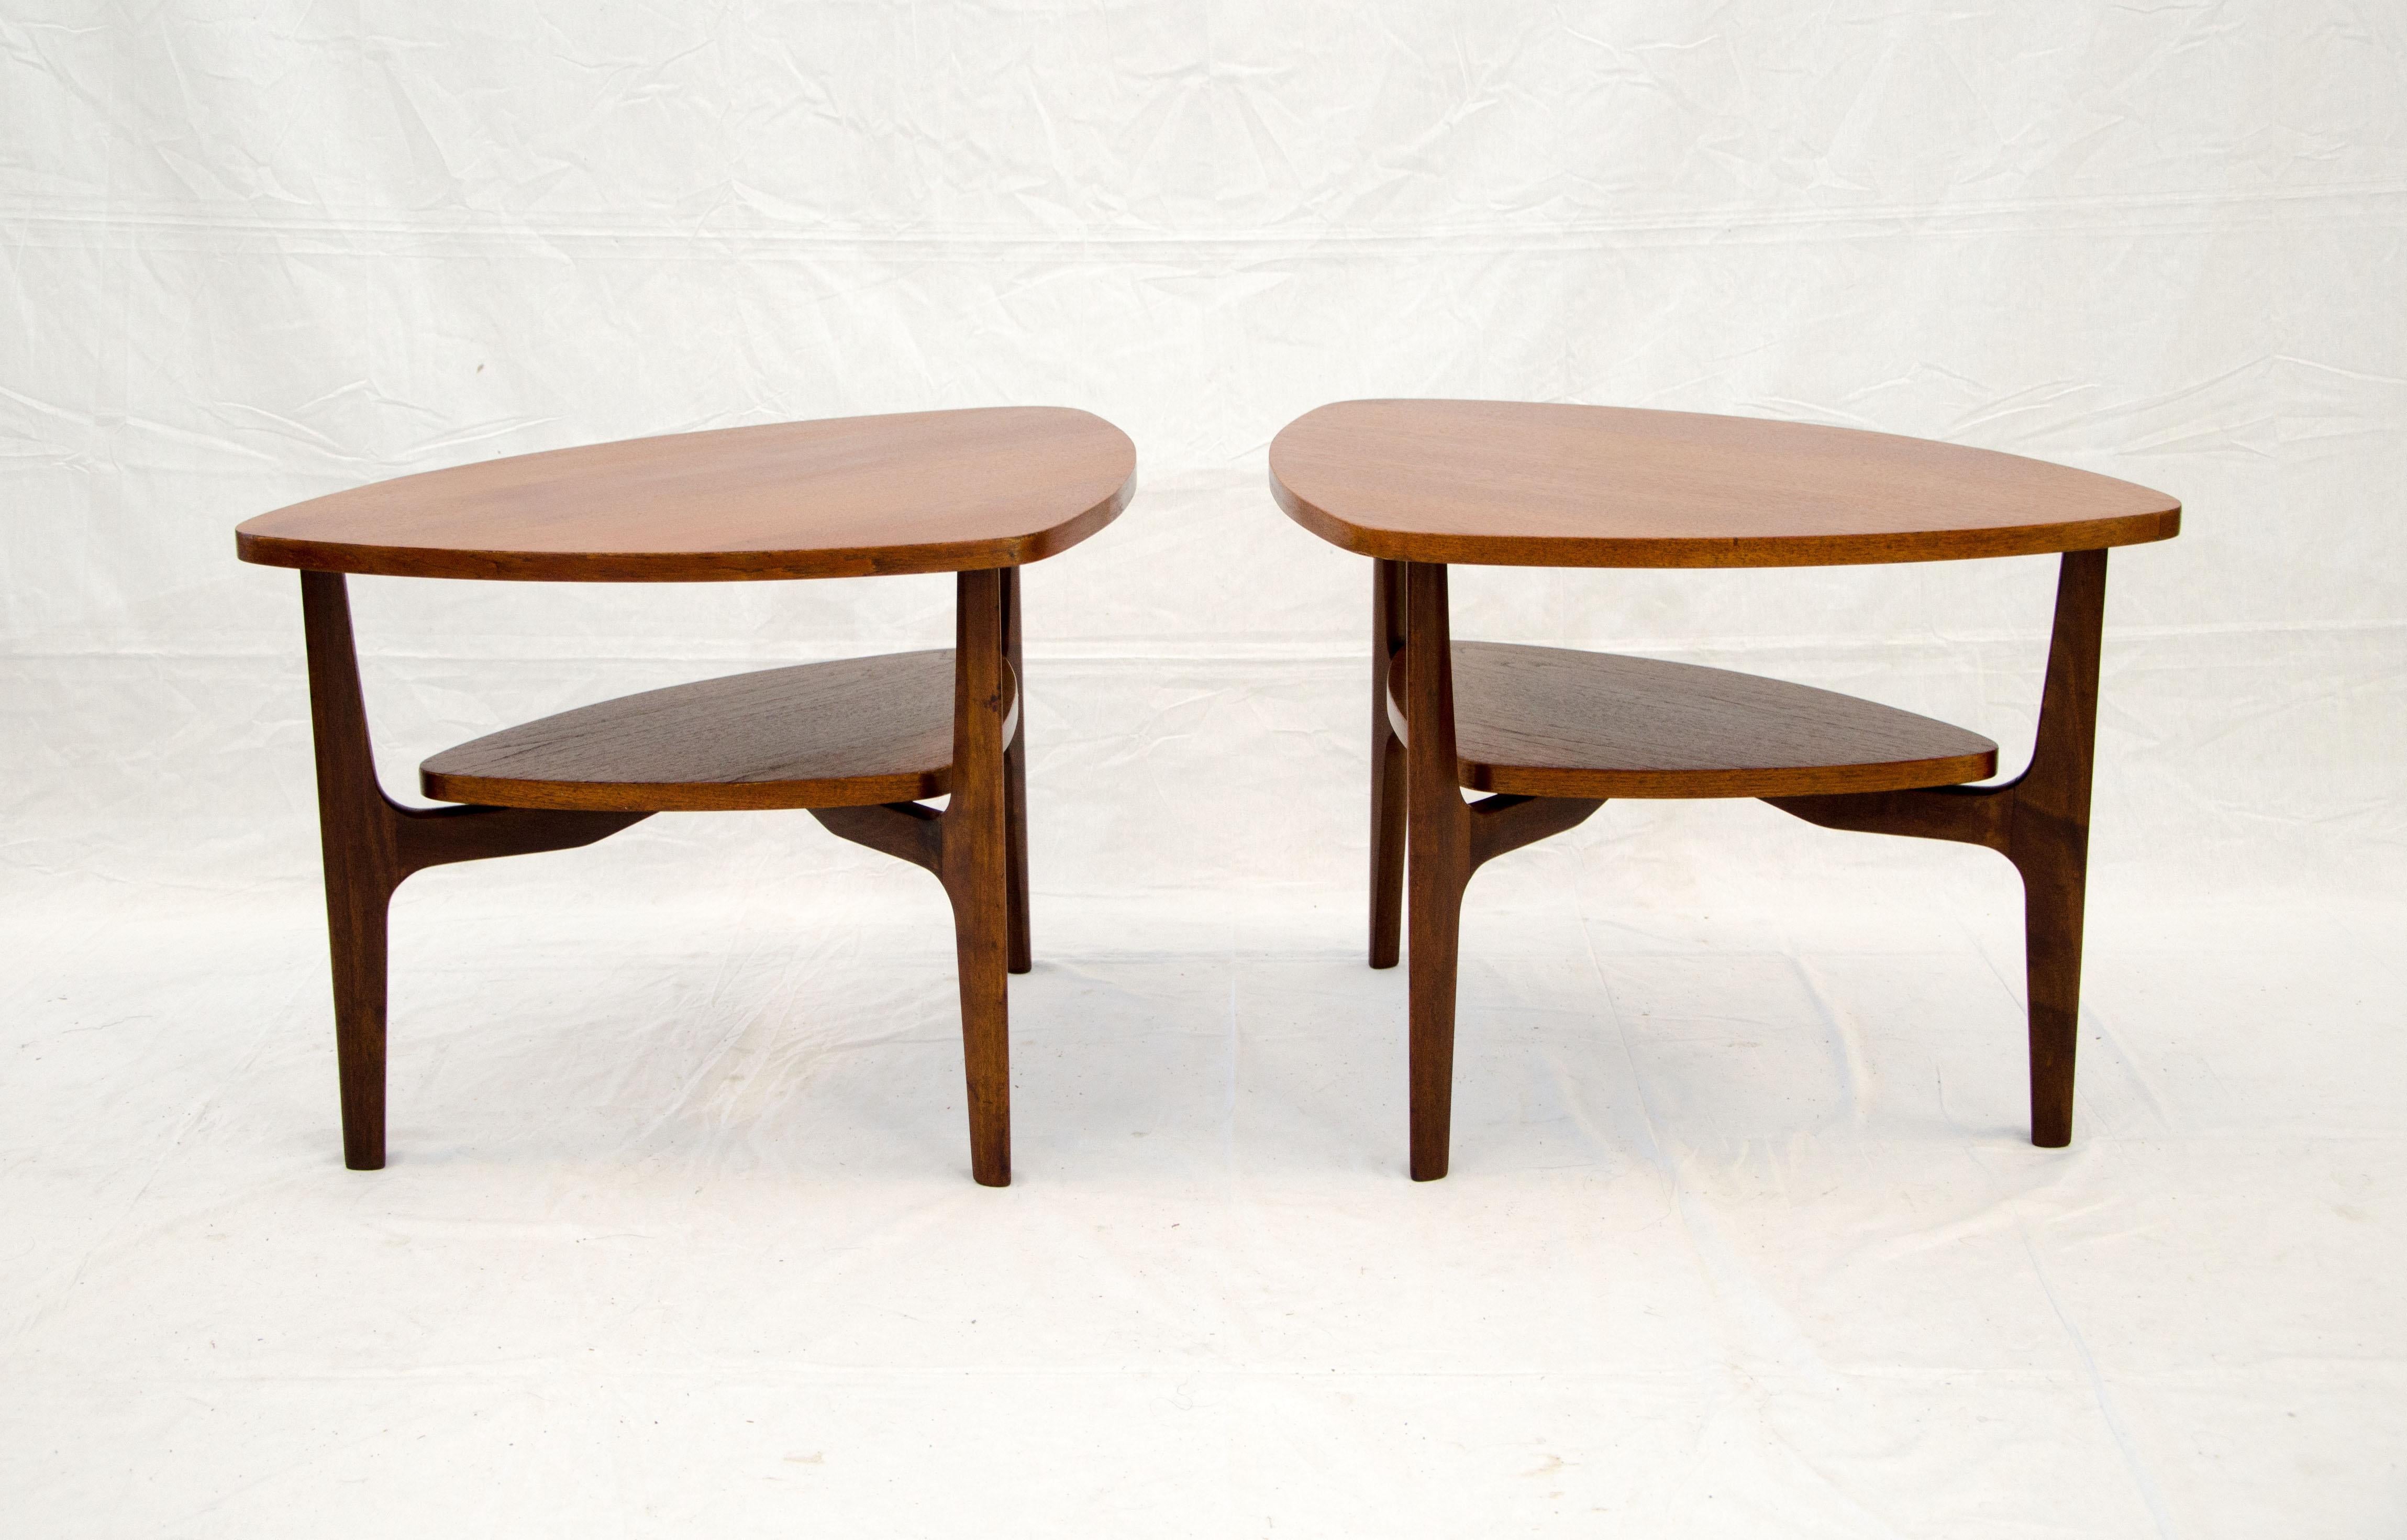 Pair of organic shaped walnut end tables that can be positioned in several different ways. The shelf and top are supported by a three-legged base. There is 7